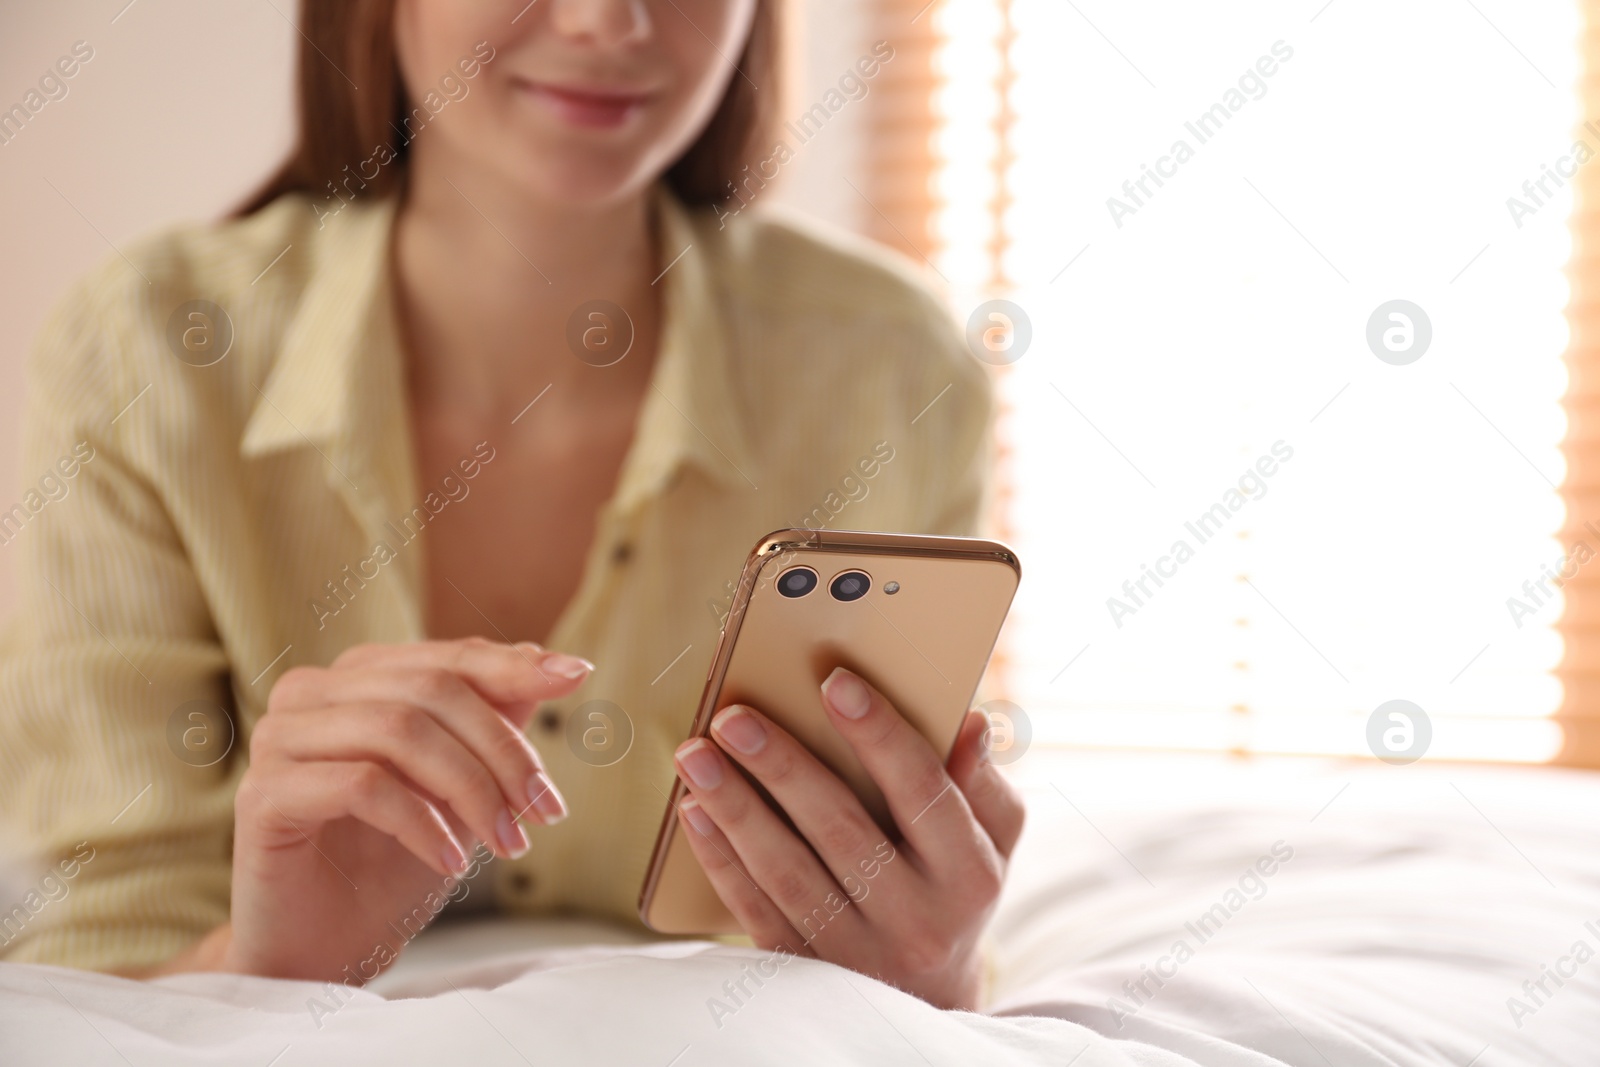 Photo of Young woman using modern smartphone on bed at home, closeup